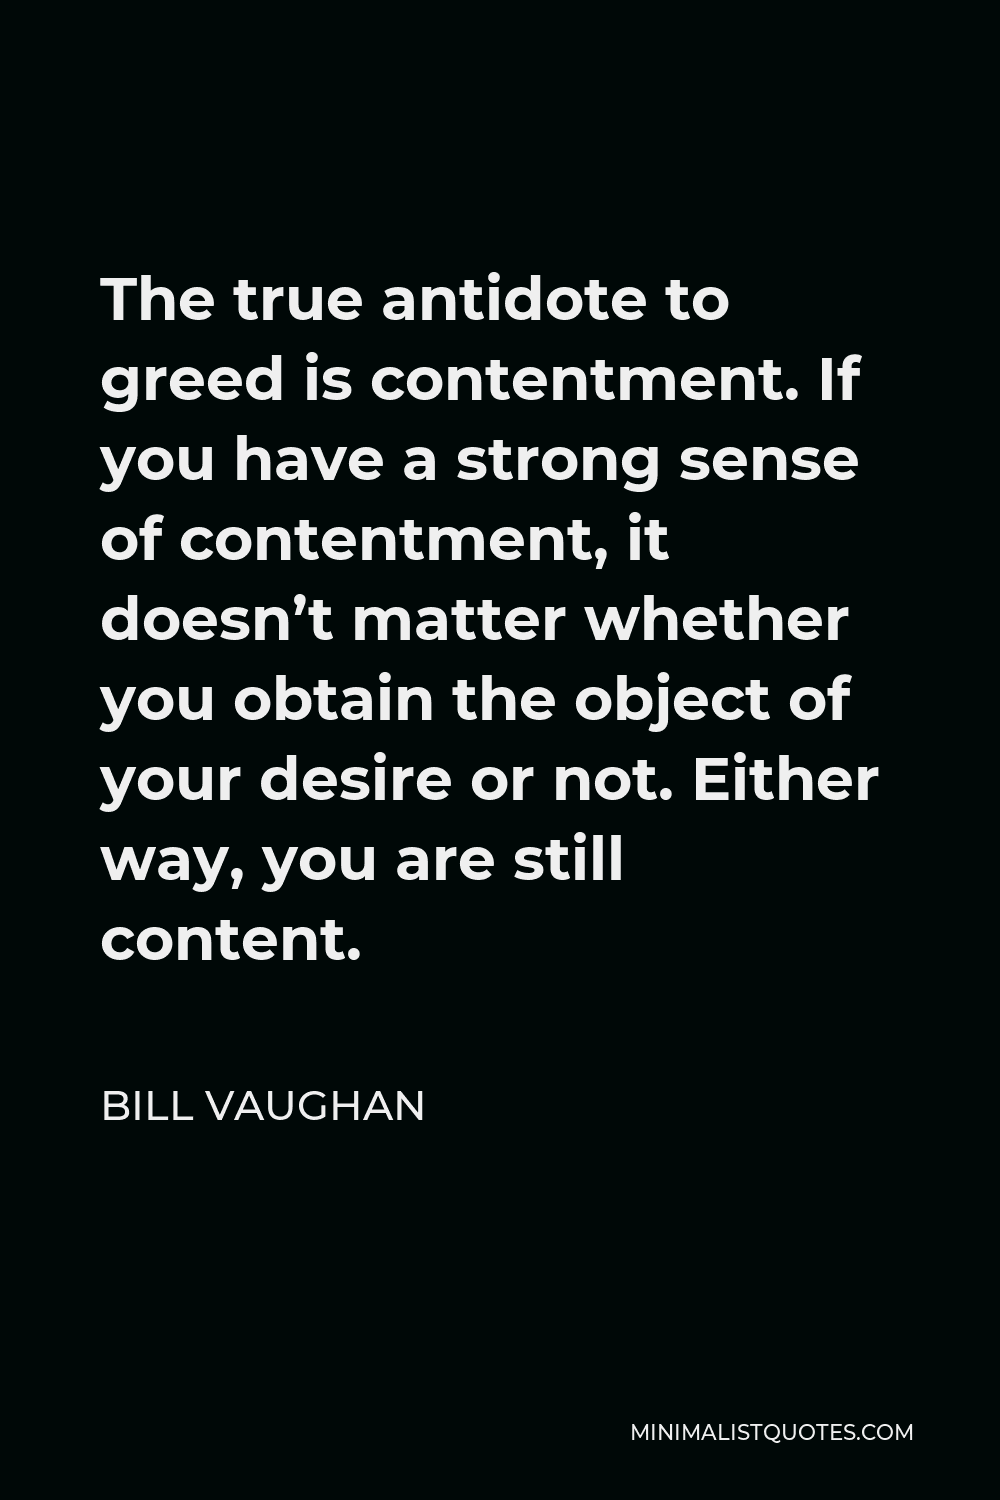 Bill Vaughan Quote - The true antidote to greed is contentment. If you have a strong sense of contentment, it doesn’t matter whether you obtain the object of your desire or not. Either way, you are still content.